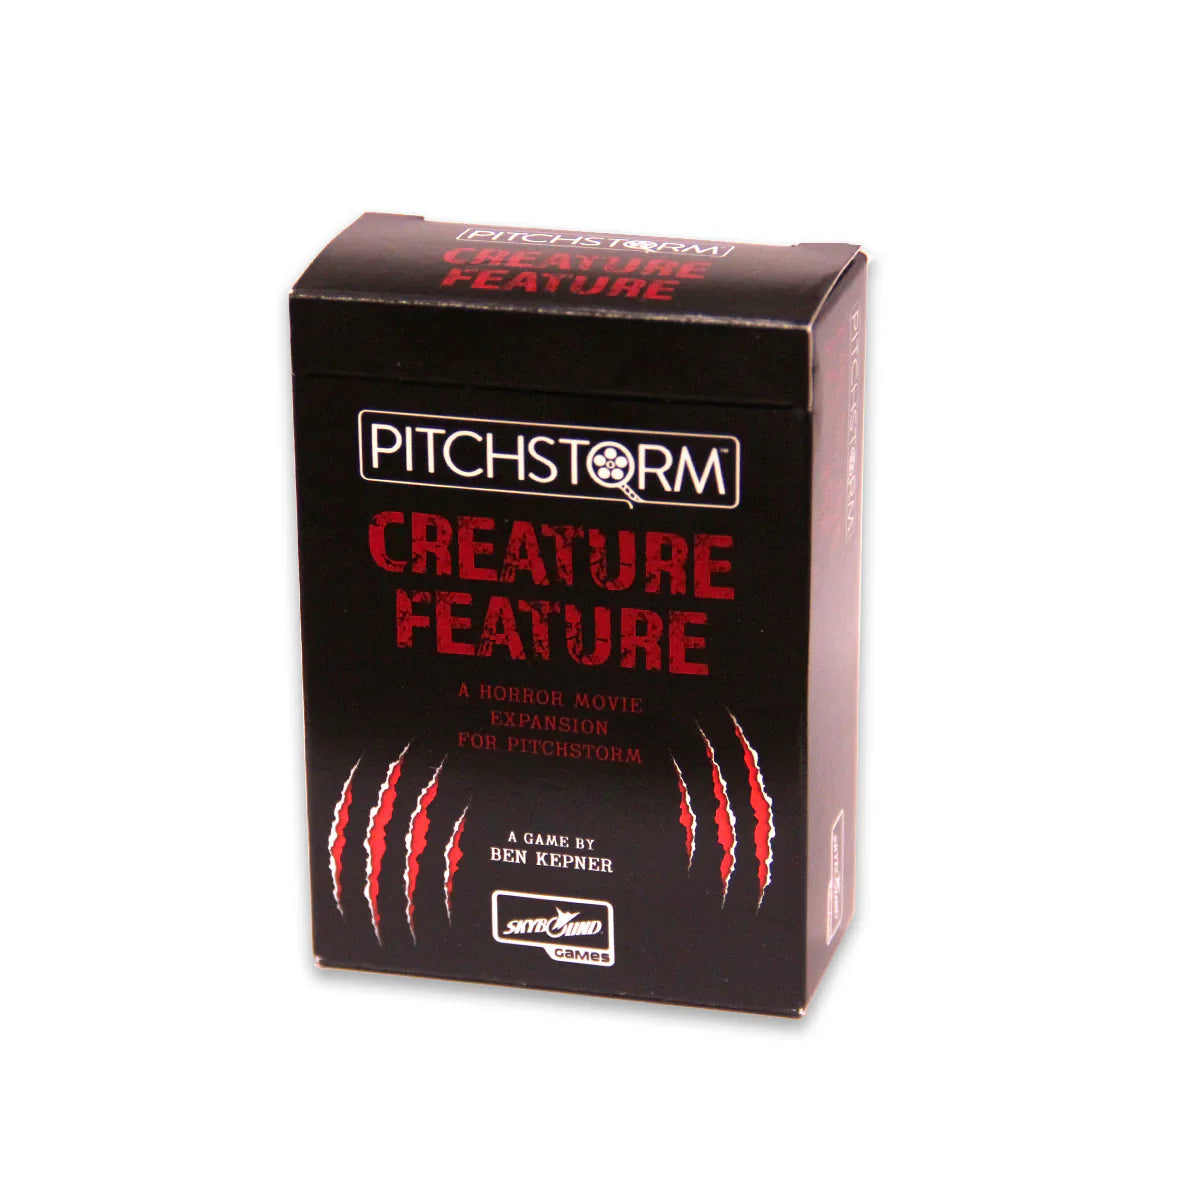 Pitchstorm Creature Feature A Horror Movie Expansion